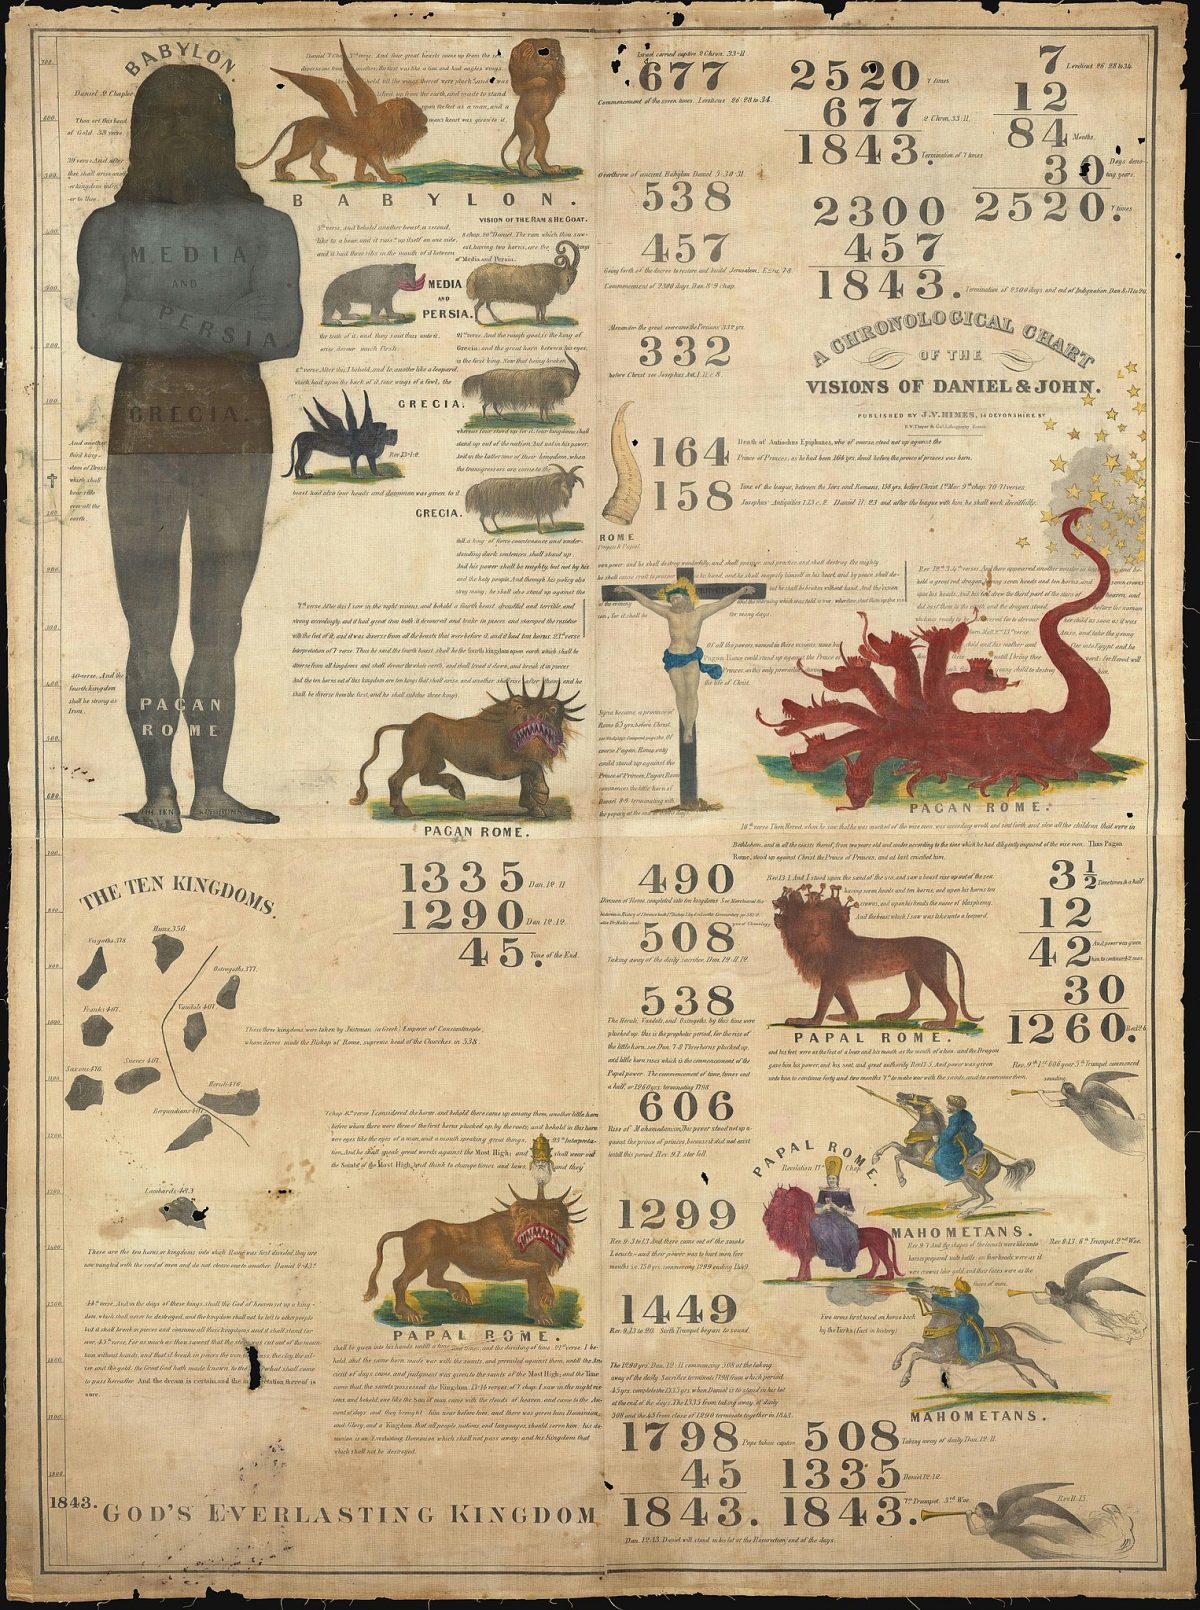  'A Chronological Chart of the Visions of Daniel and John', printed by Joshua Himes in 1842